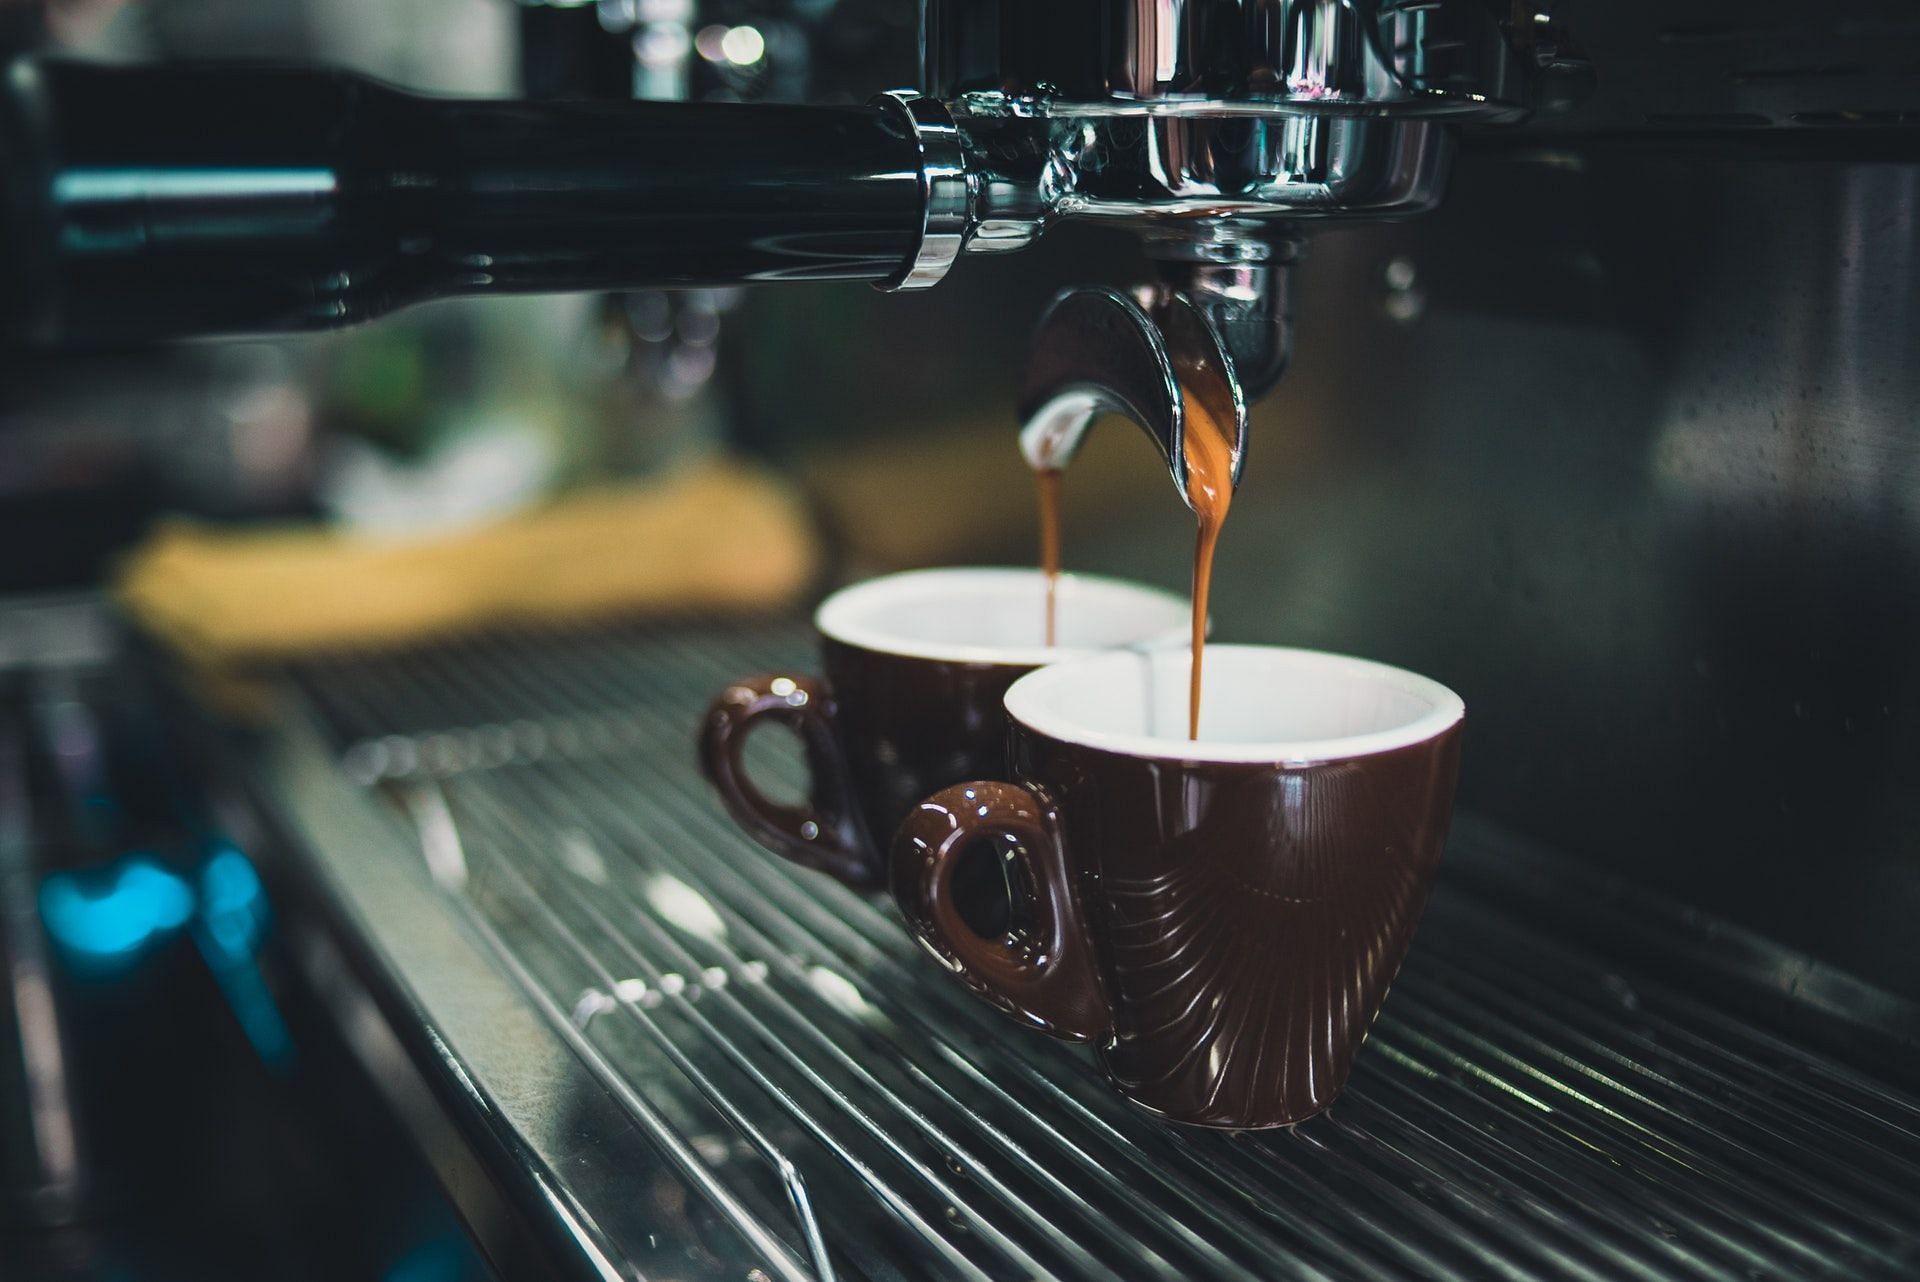 How does caffeine help with workouts? (Image via Pexels/Photo by Chevanon Photography)